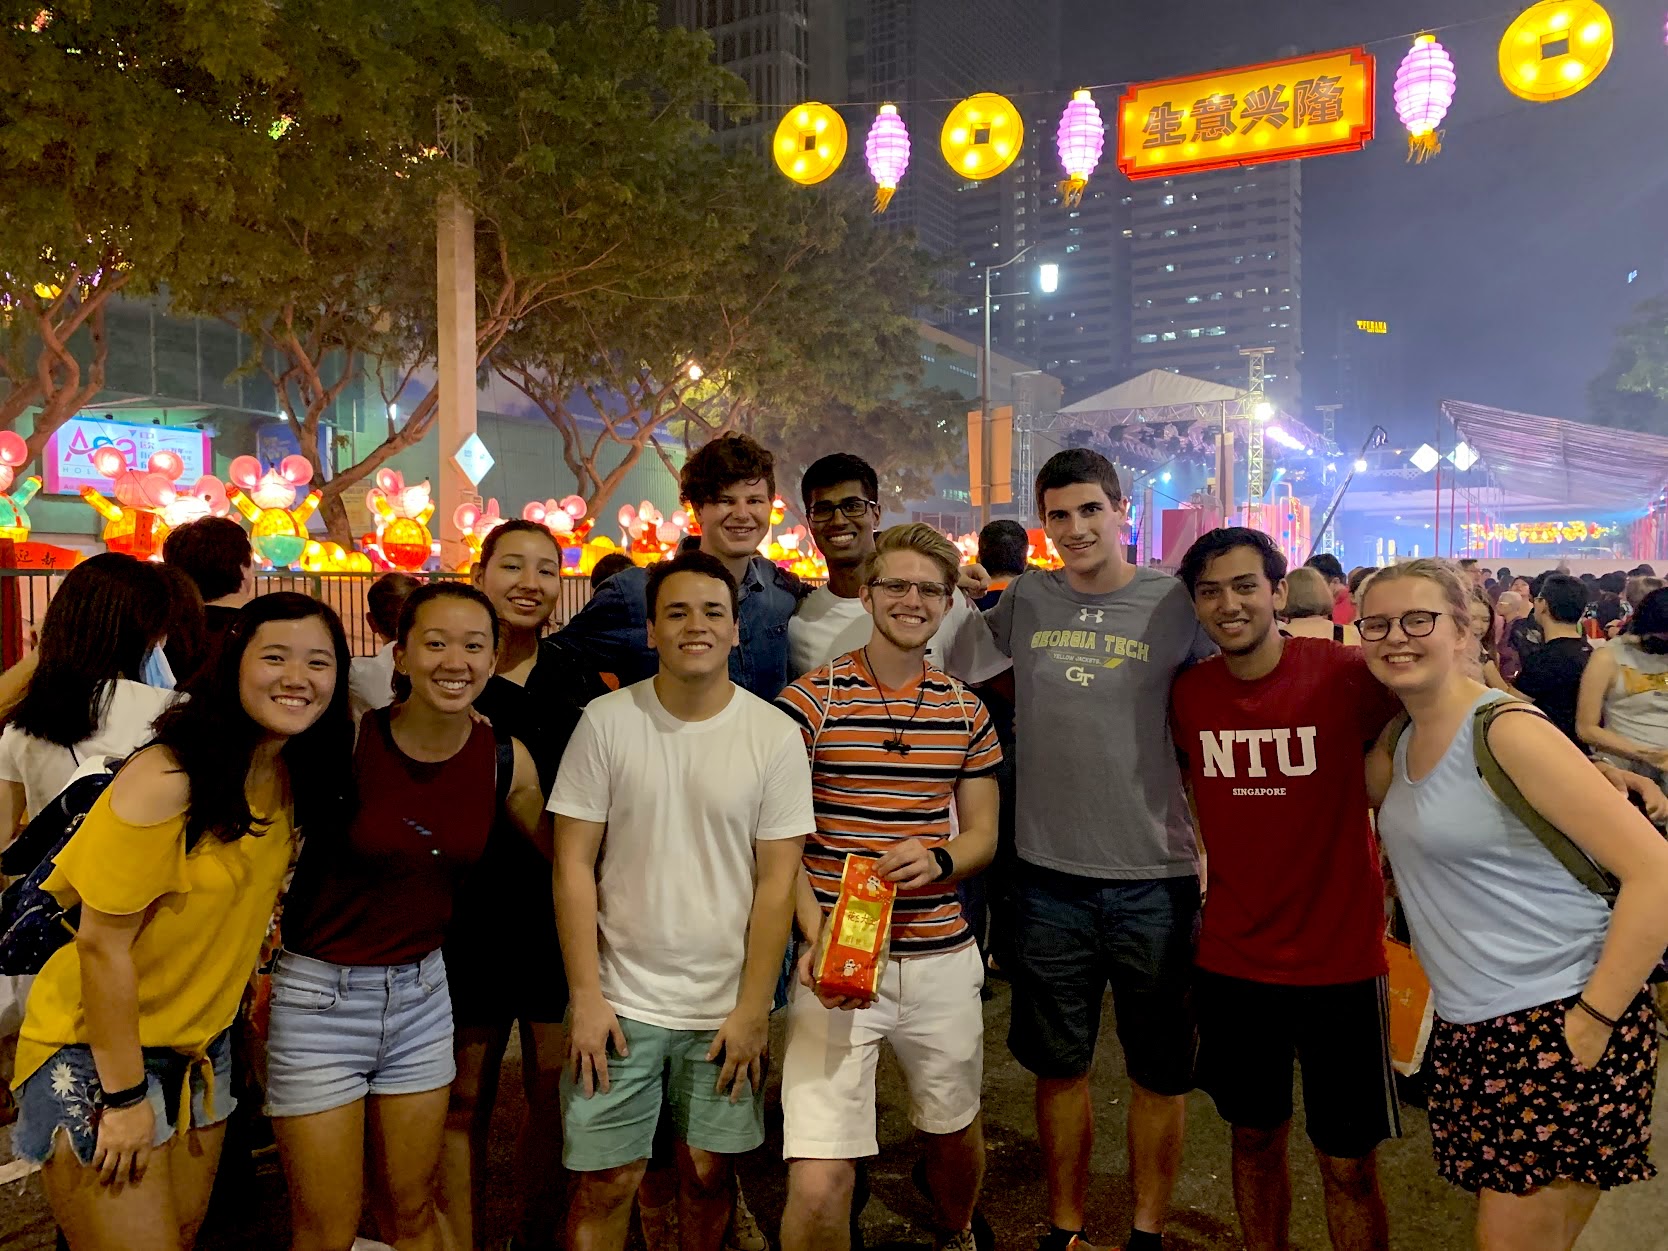 Group of 10 Tech students posing for a photo in a crowded, colorful square in Singapore